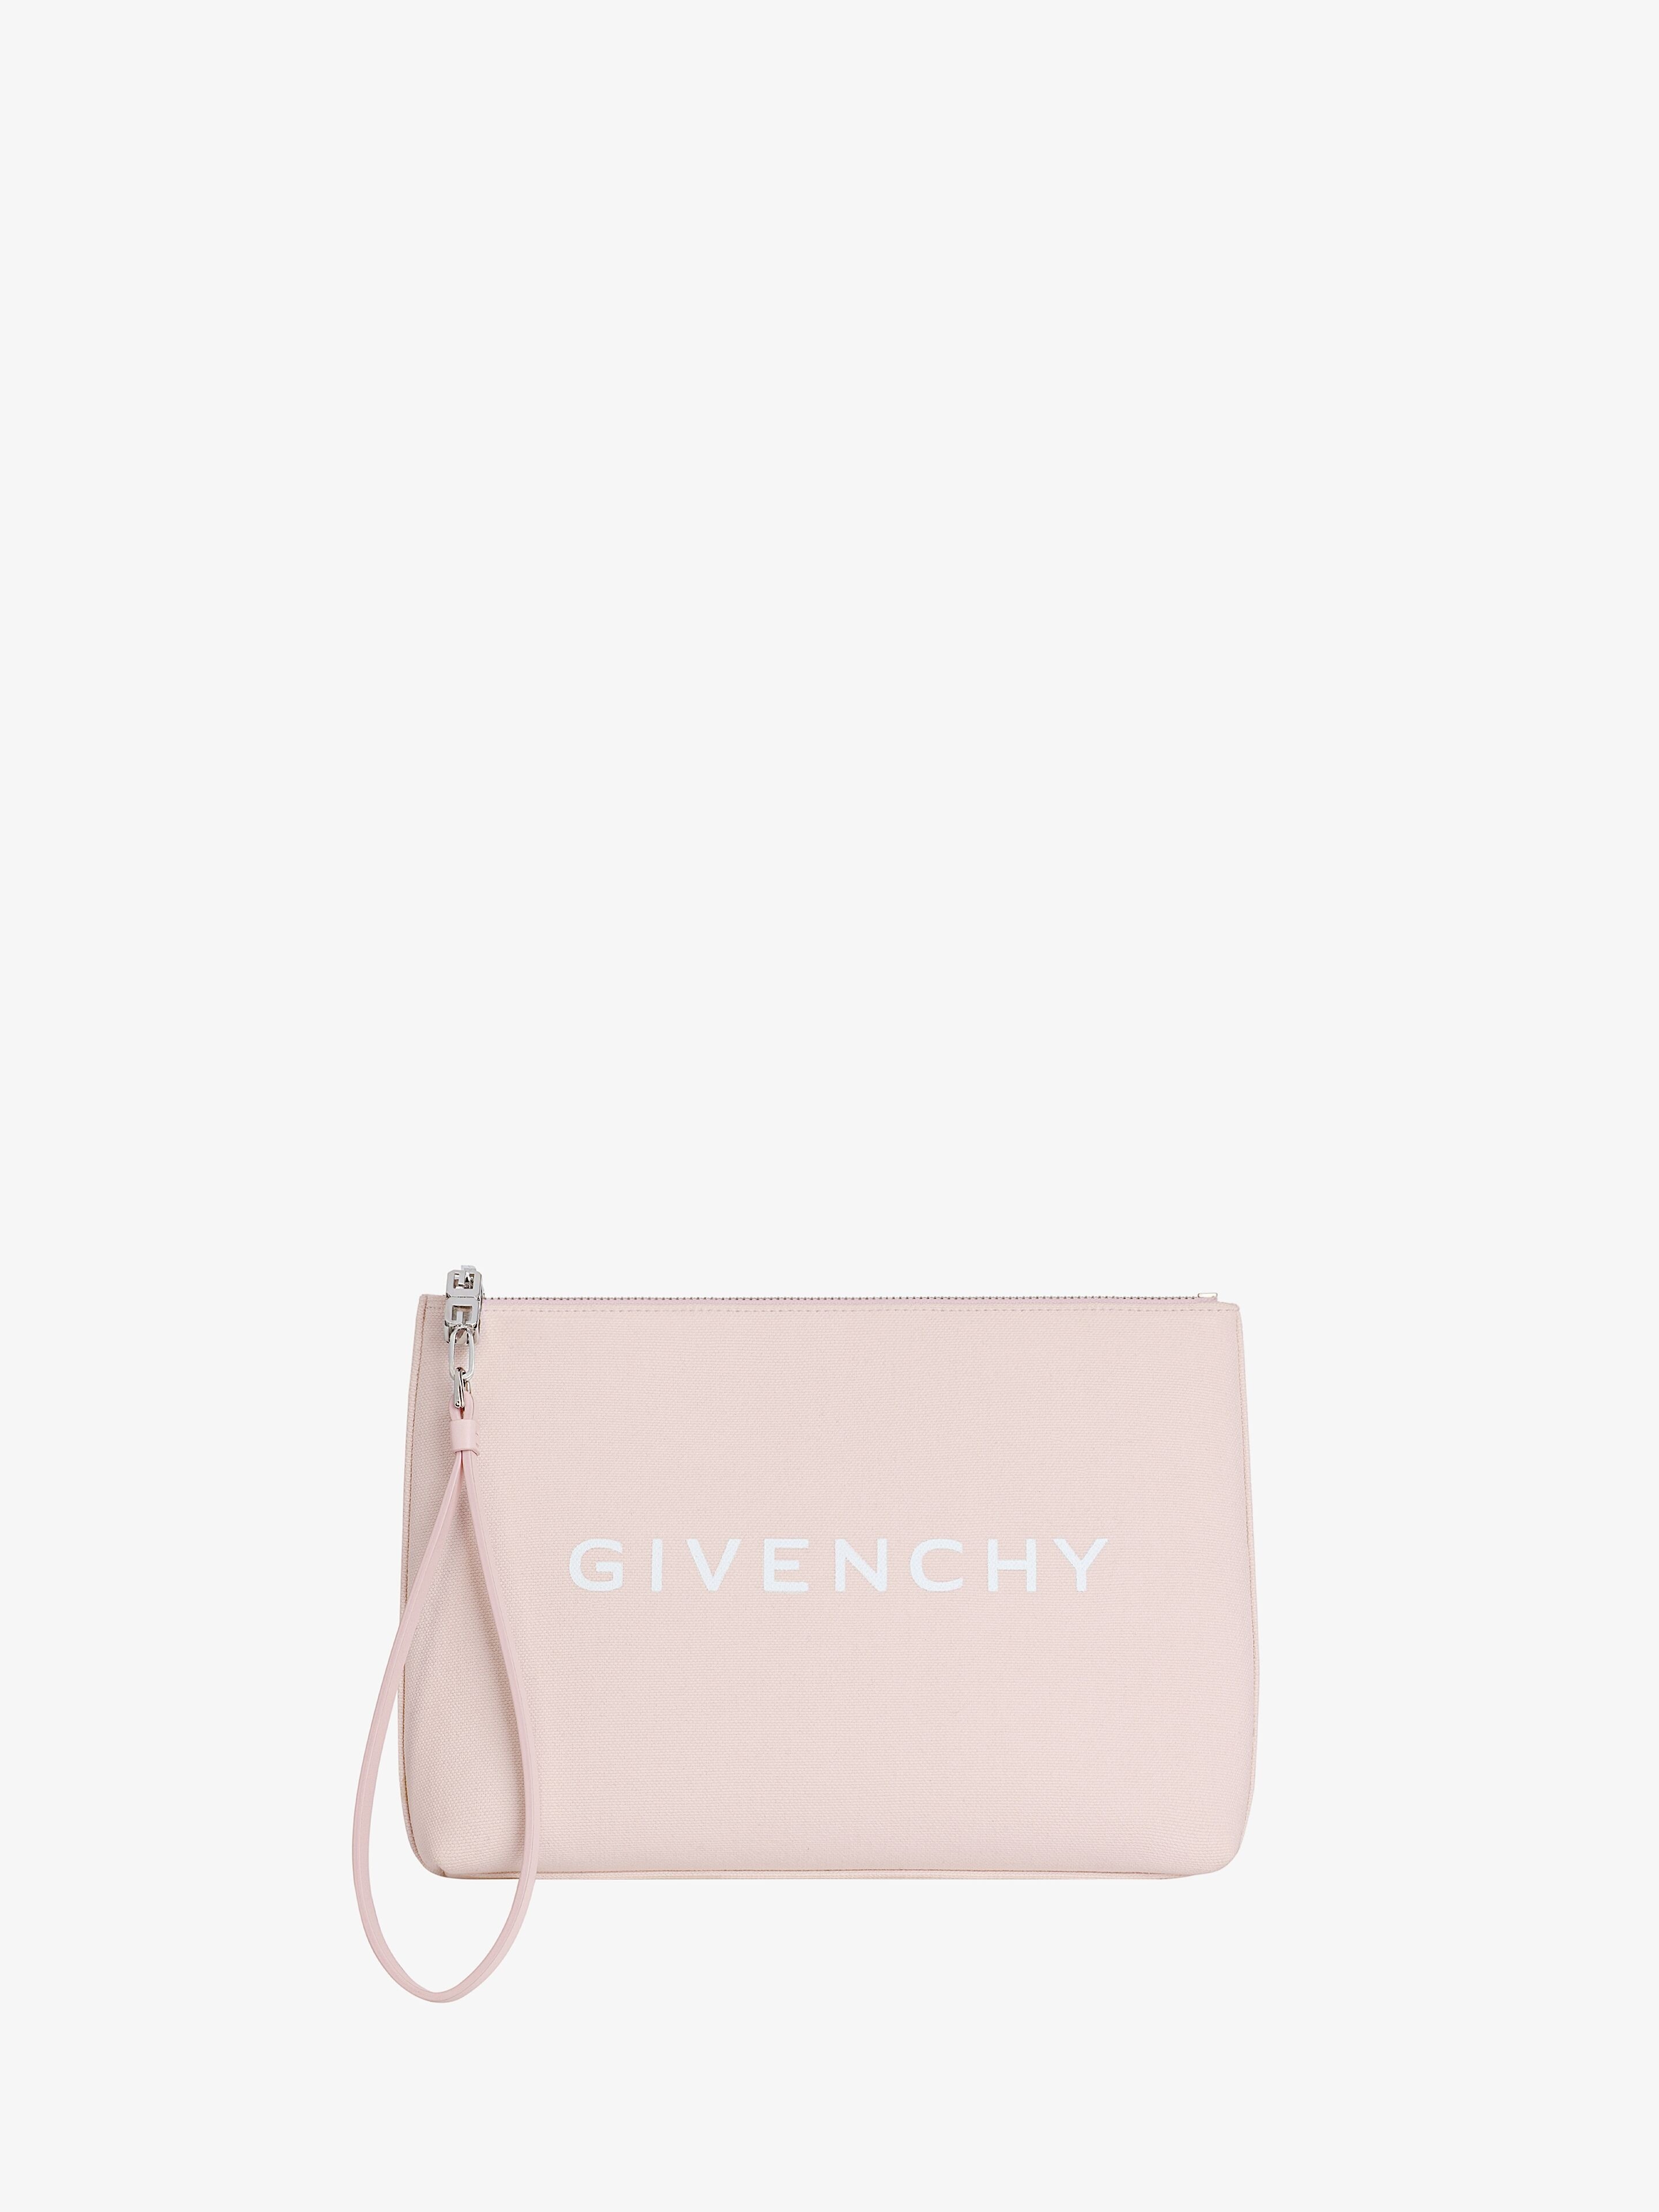 GIVENCHY TRAVEL POUCH IN CANVAS - 1